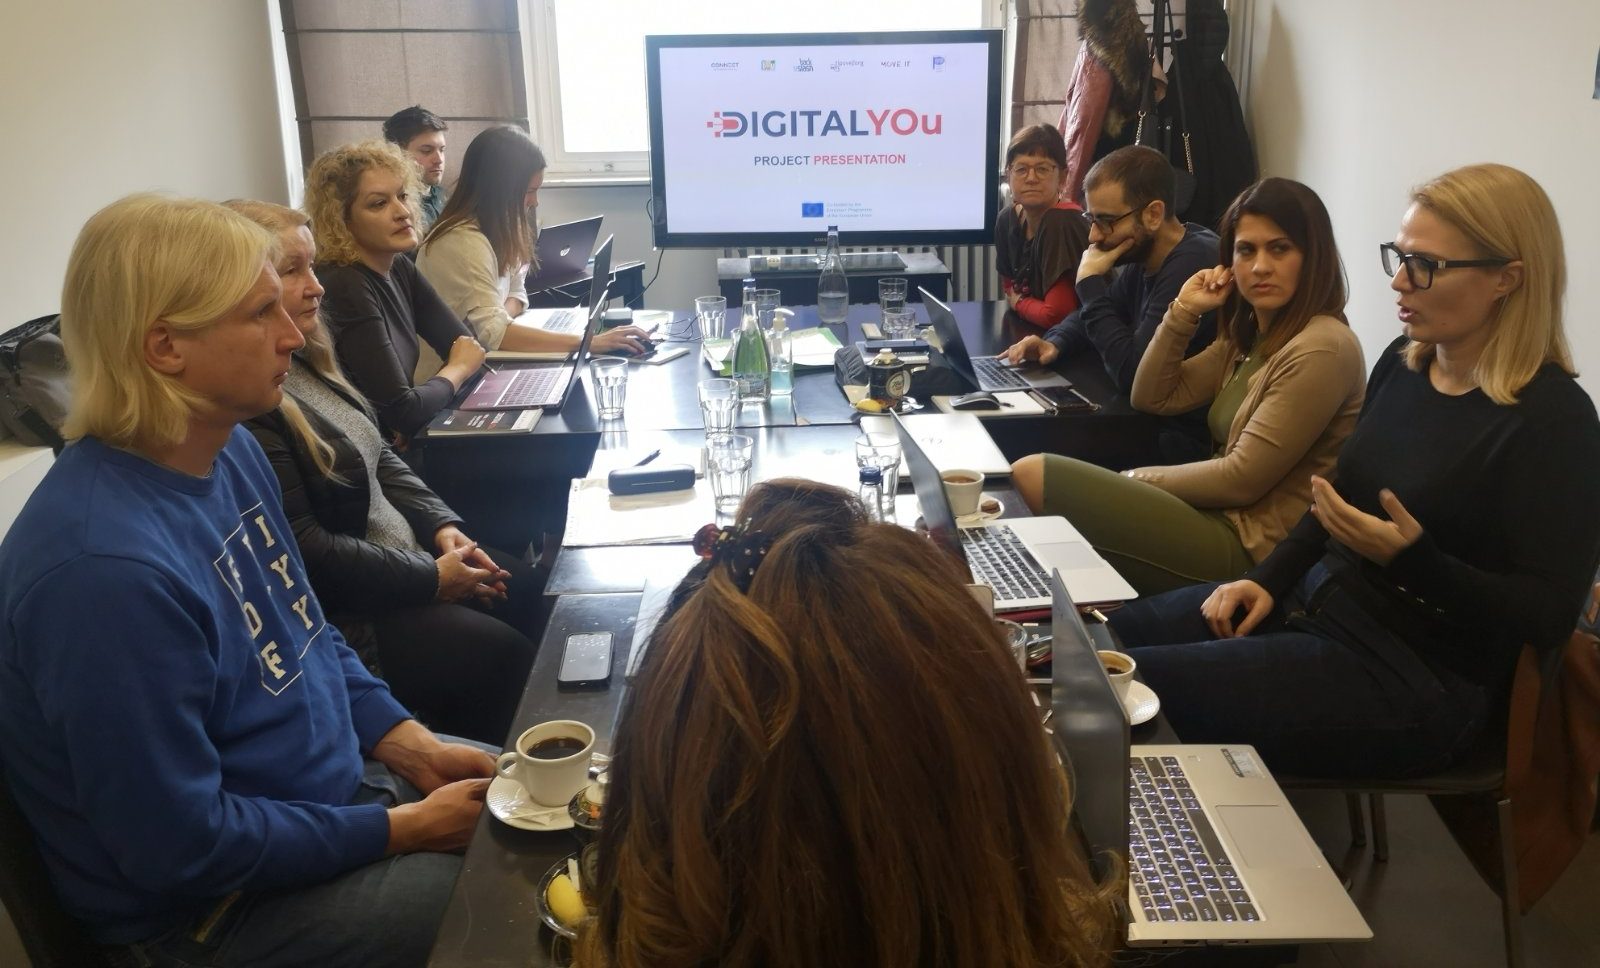 You are currently viewing Kickoff Meeting within the “DigitalYOu” project held in Belgrade